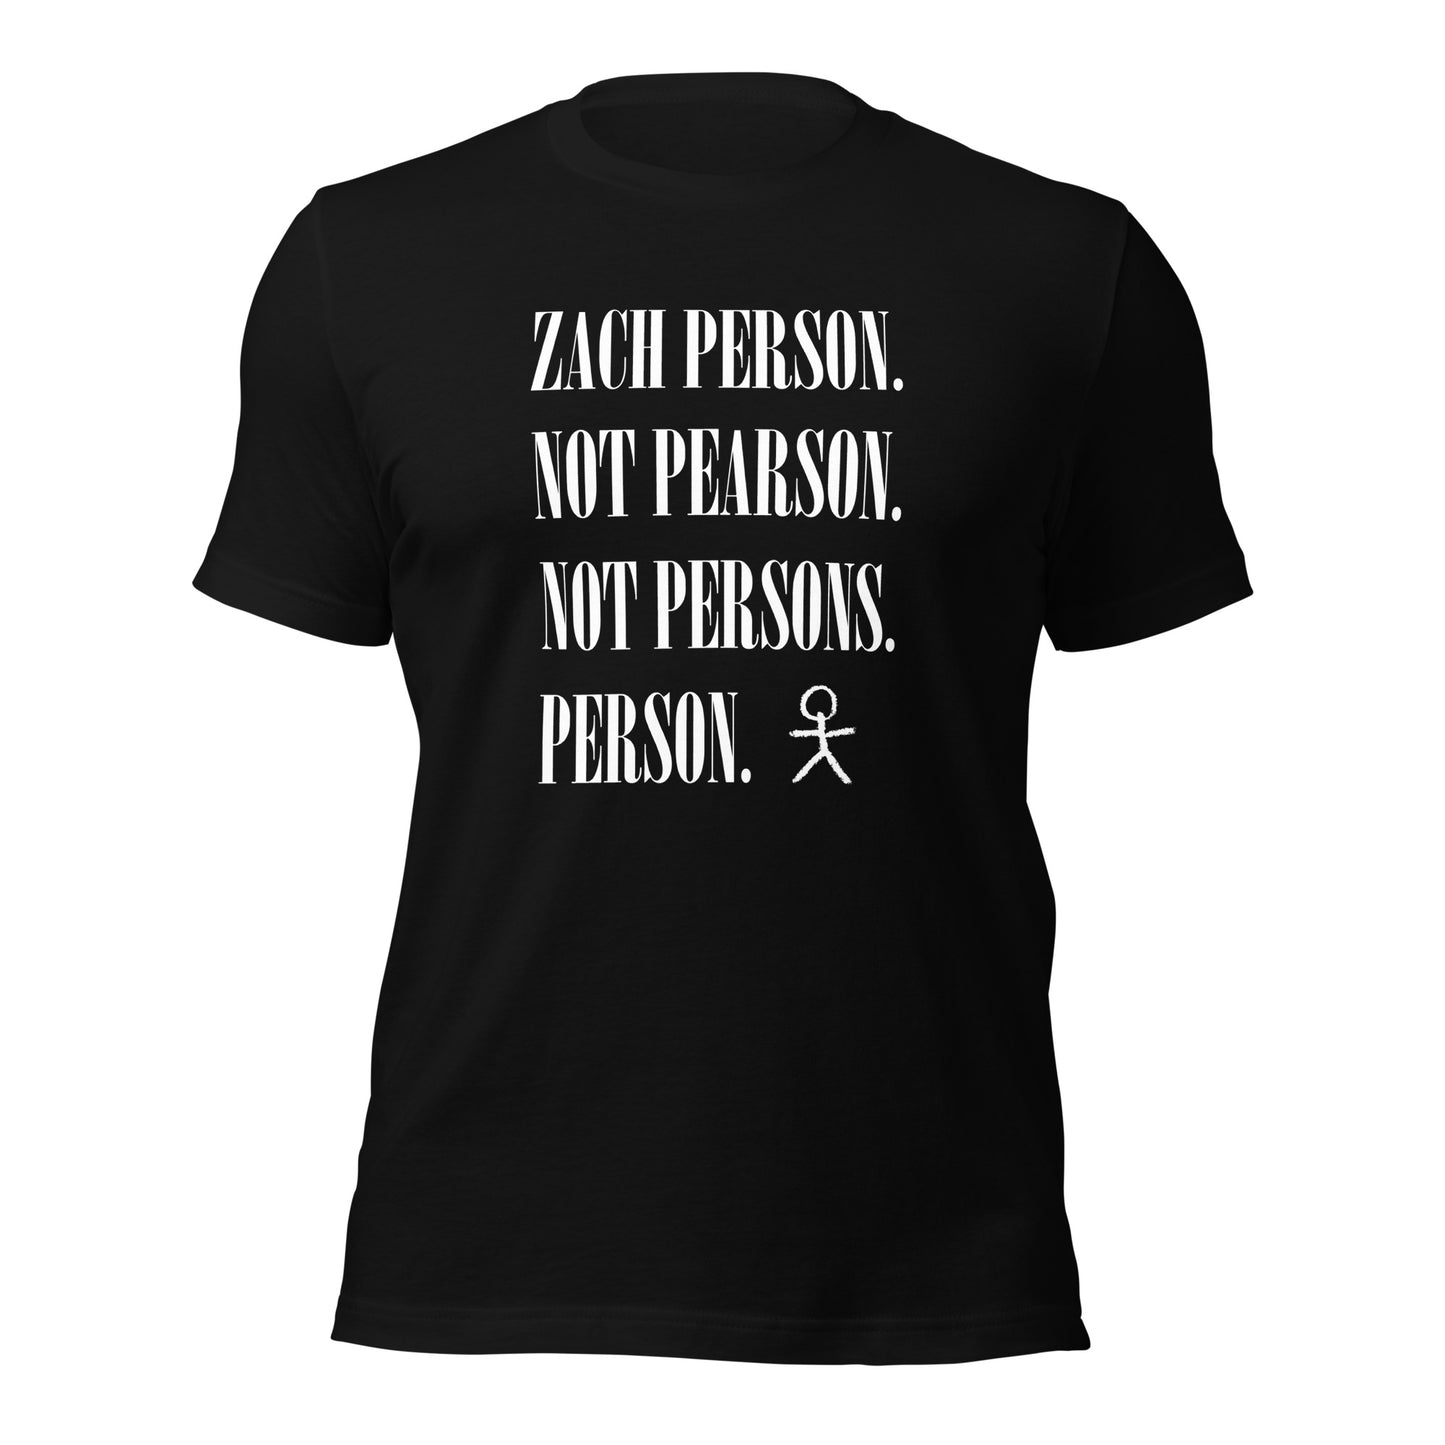 "PERSON" T-Shirt